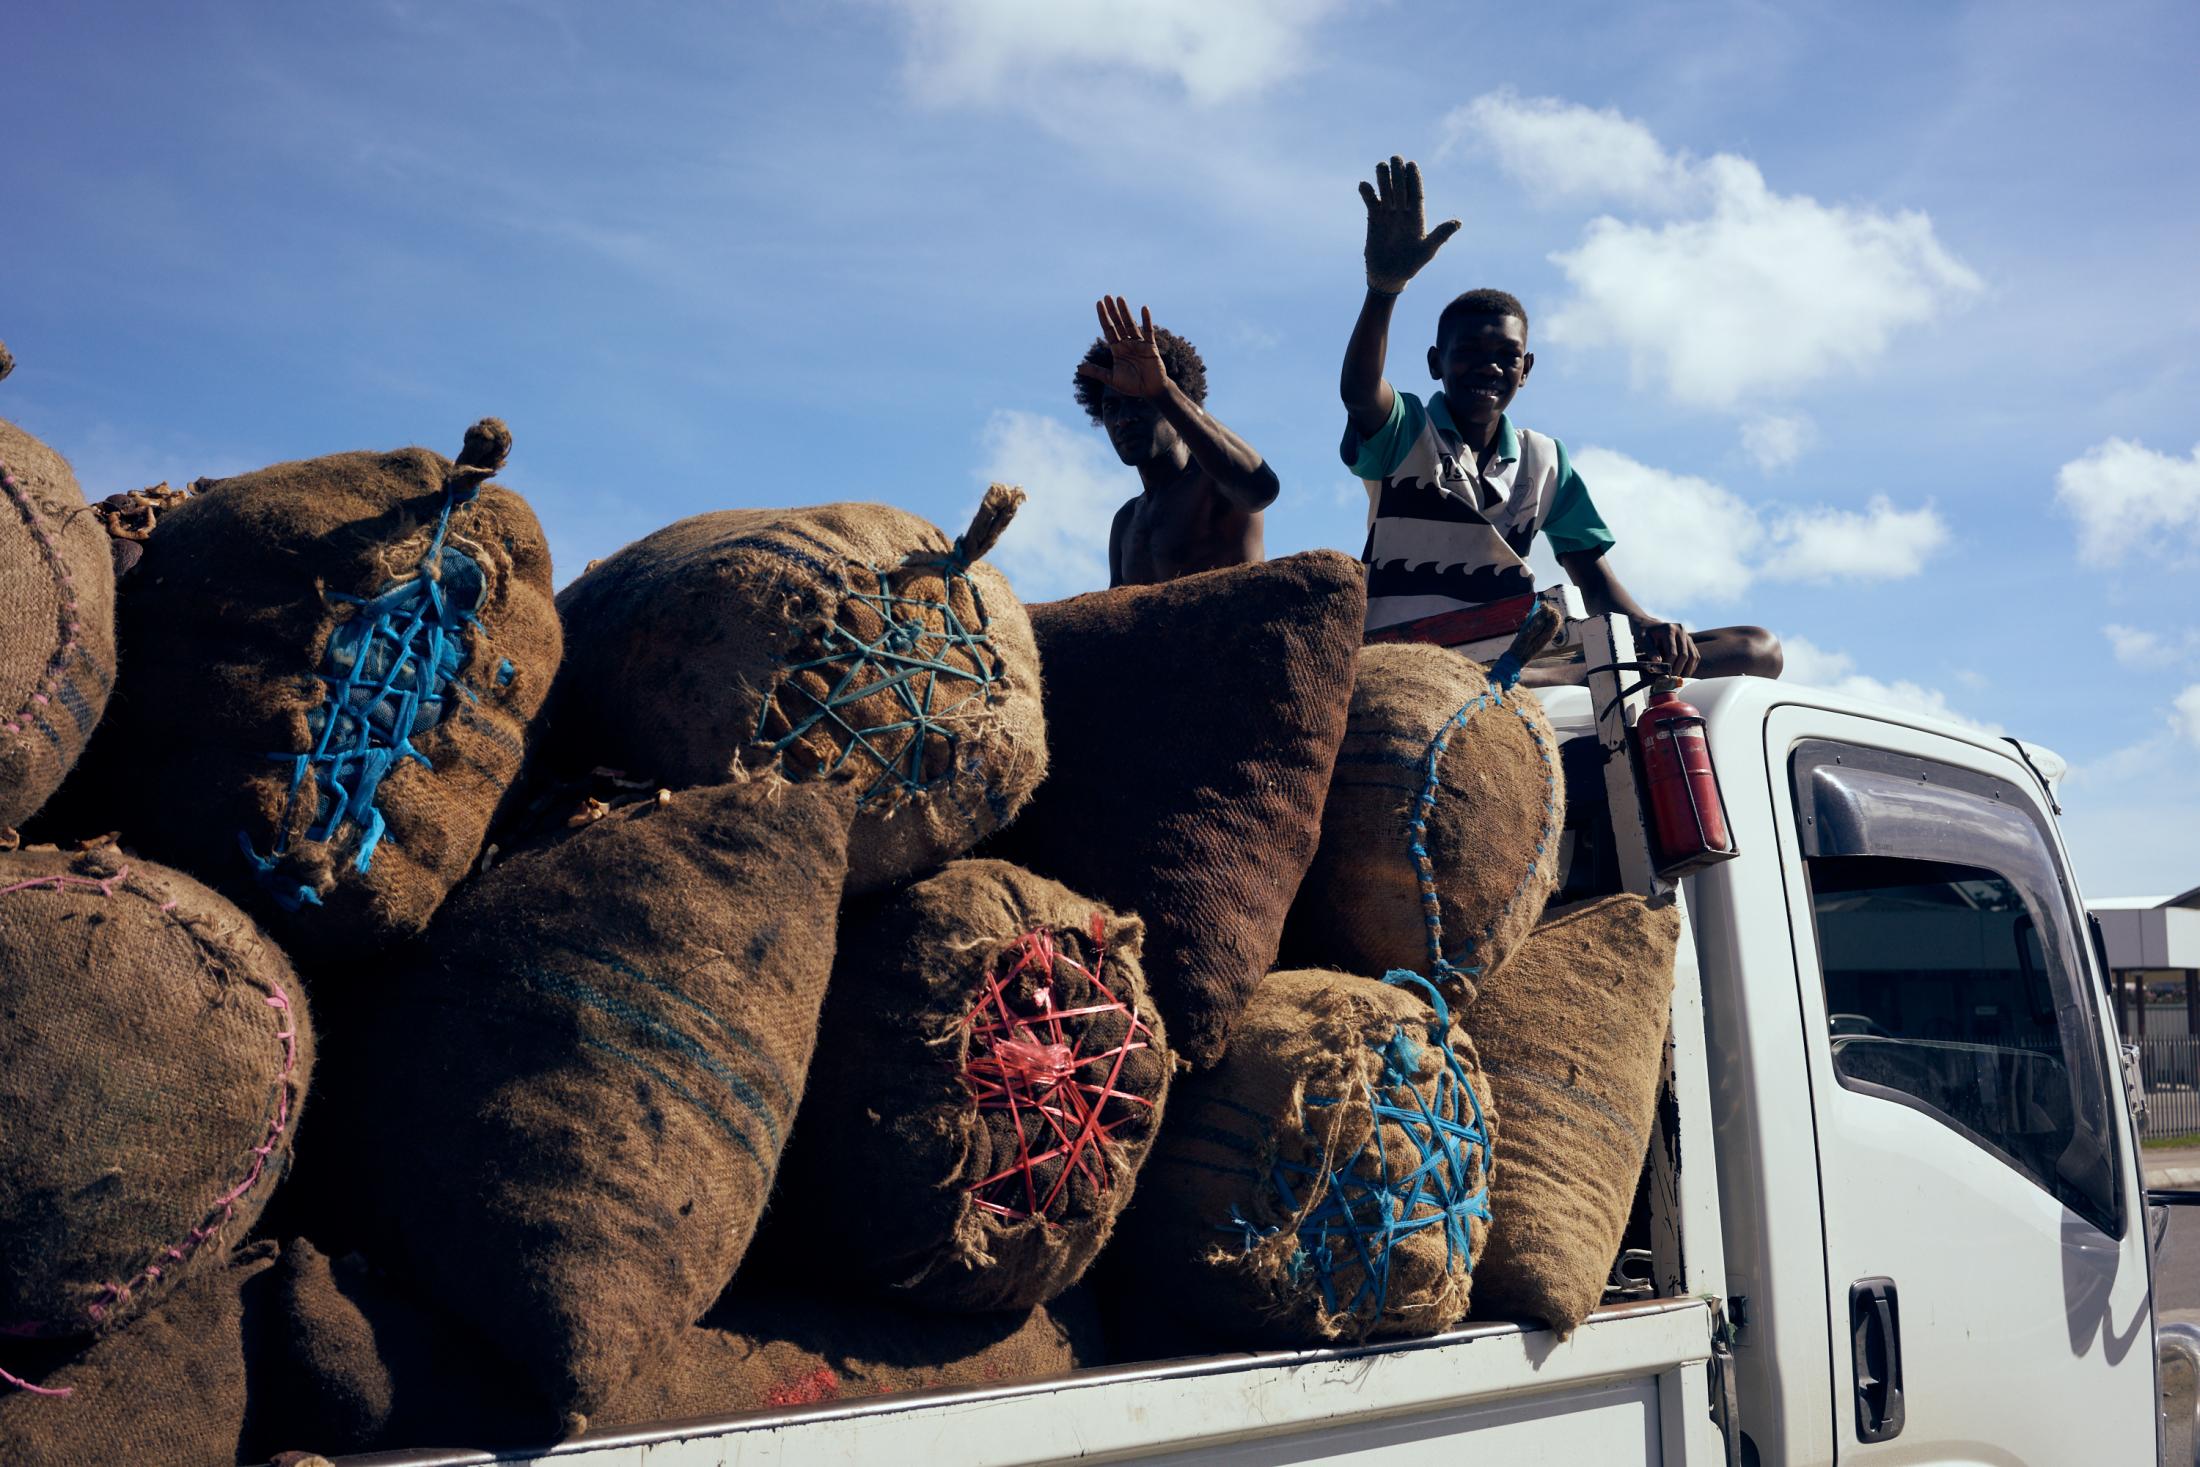 IFAD Photo Mission 2019 - Transporting bags of cocoa beans through the streets of...